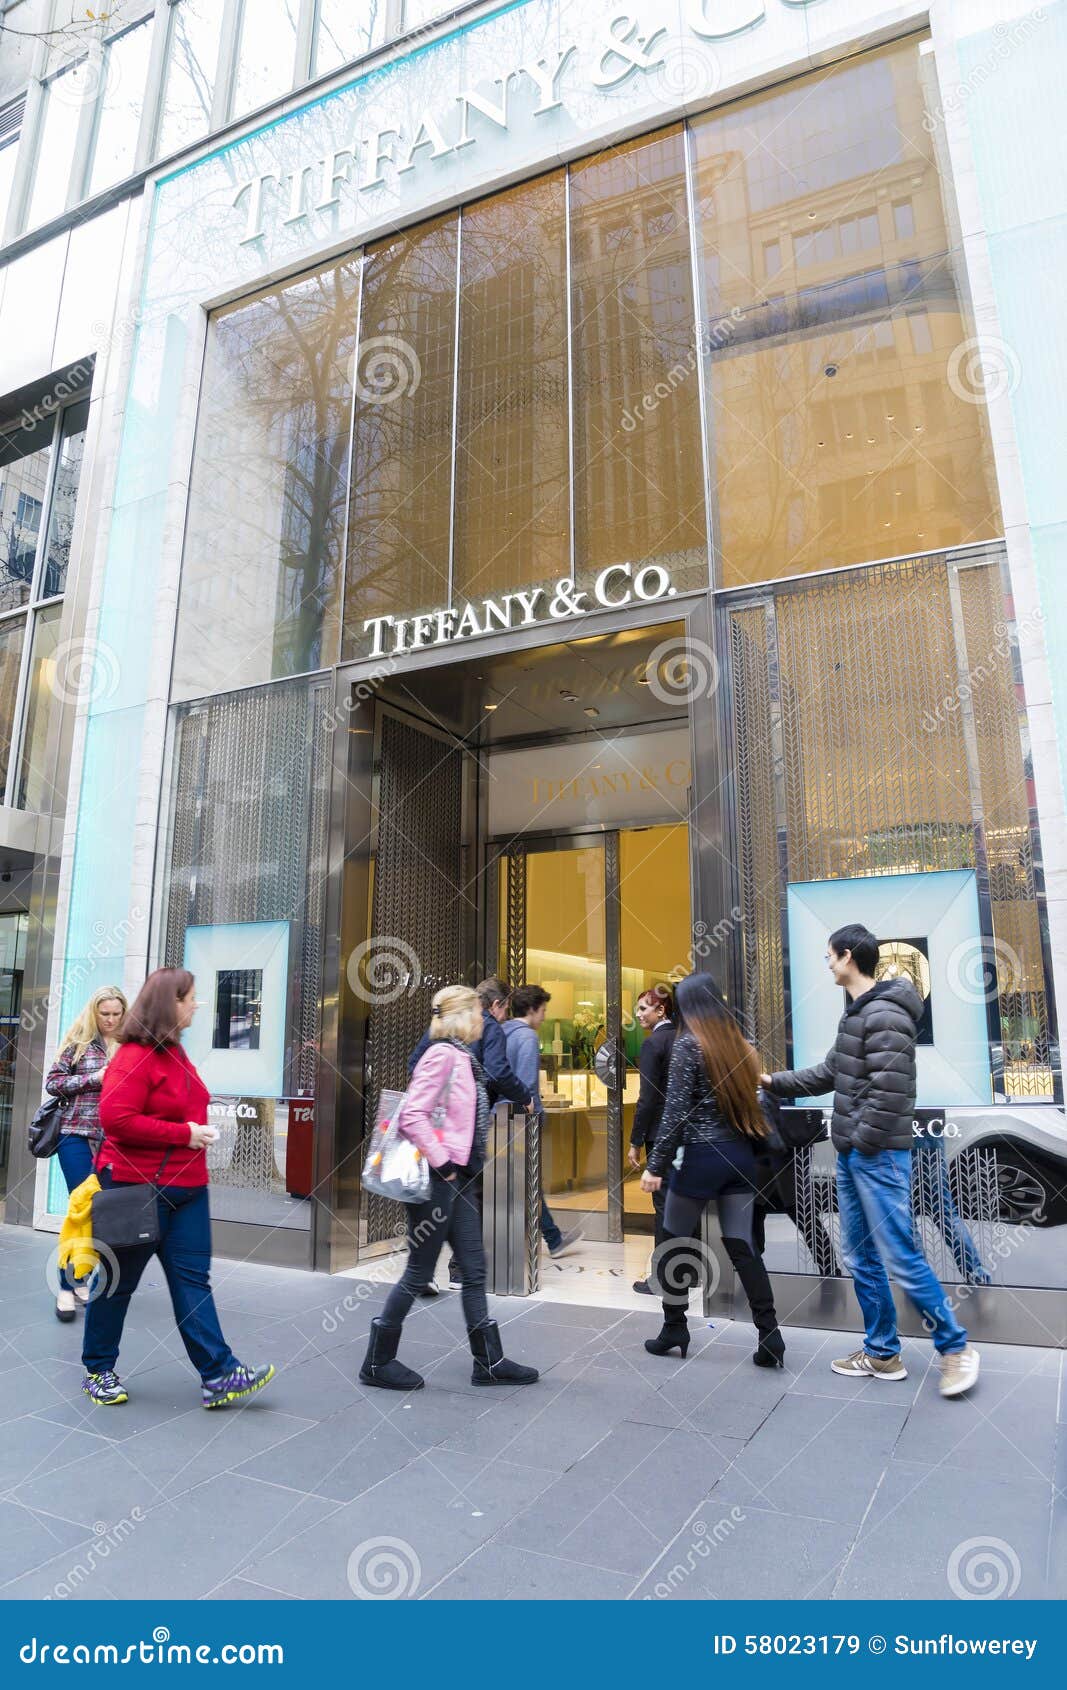 tiffany stores going